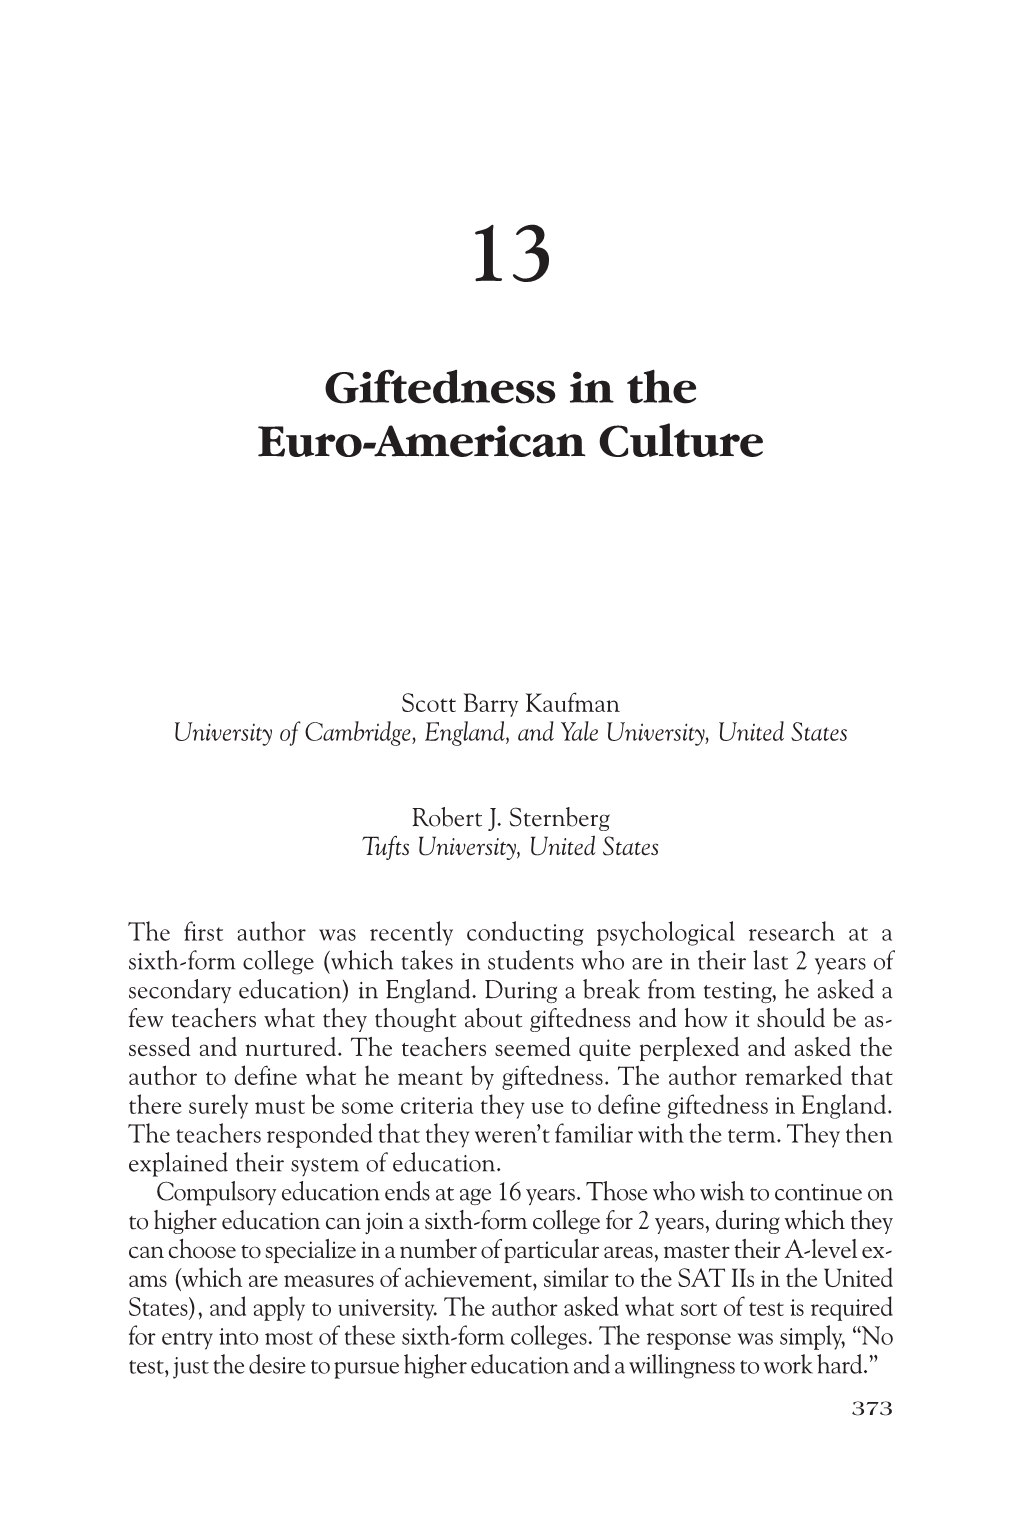 Giftedness in the Euro-American Culture